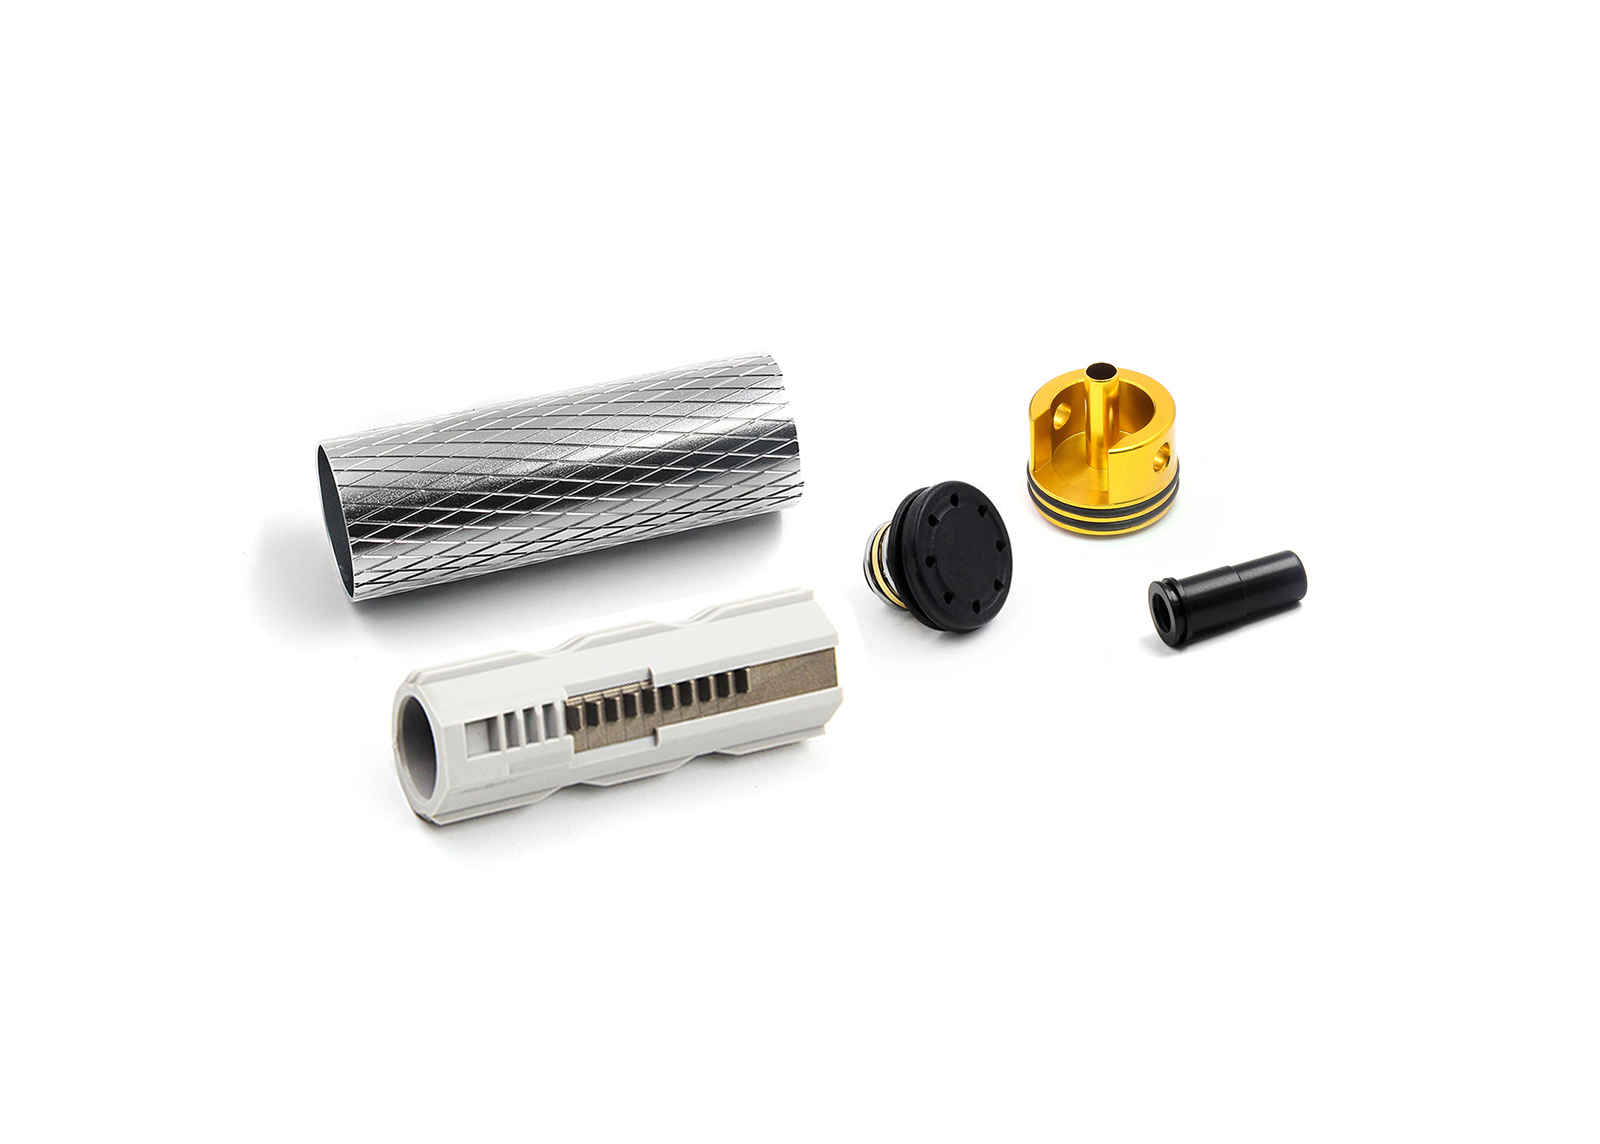 Cylinder Set for M16-A1/VN (AOE Piston) - Modify Airsoft parts